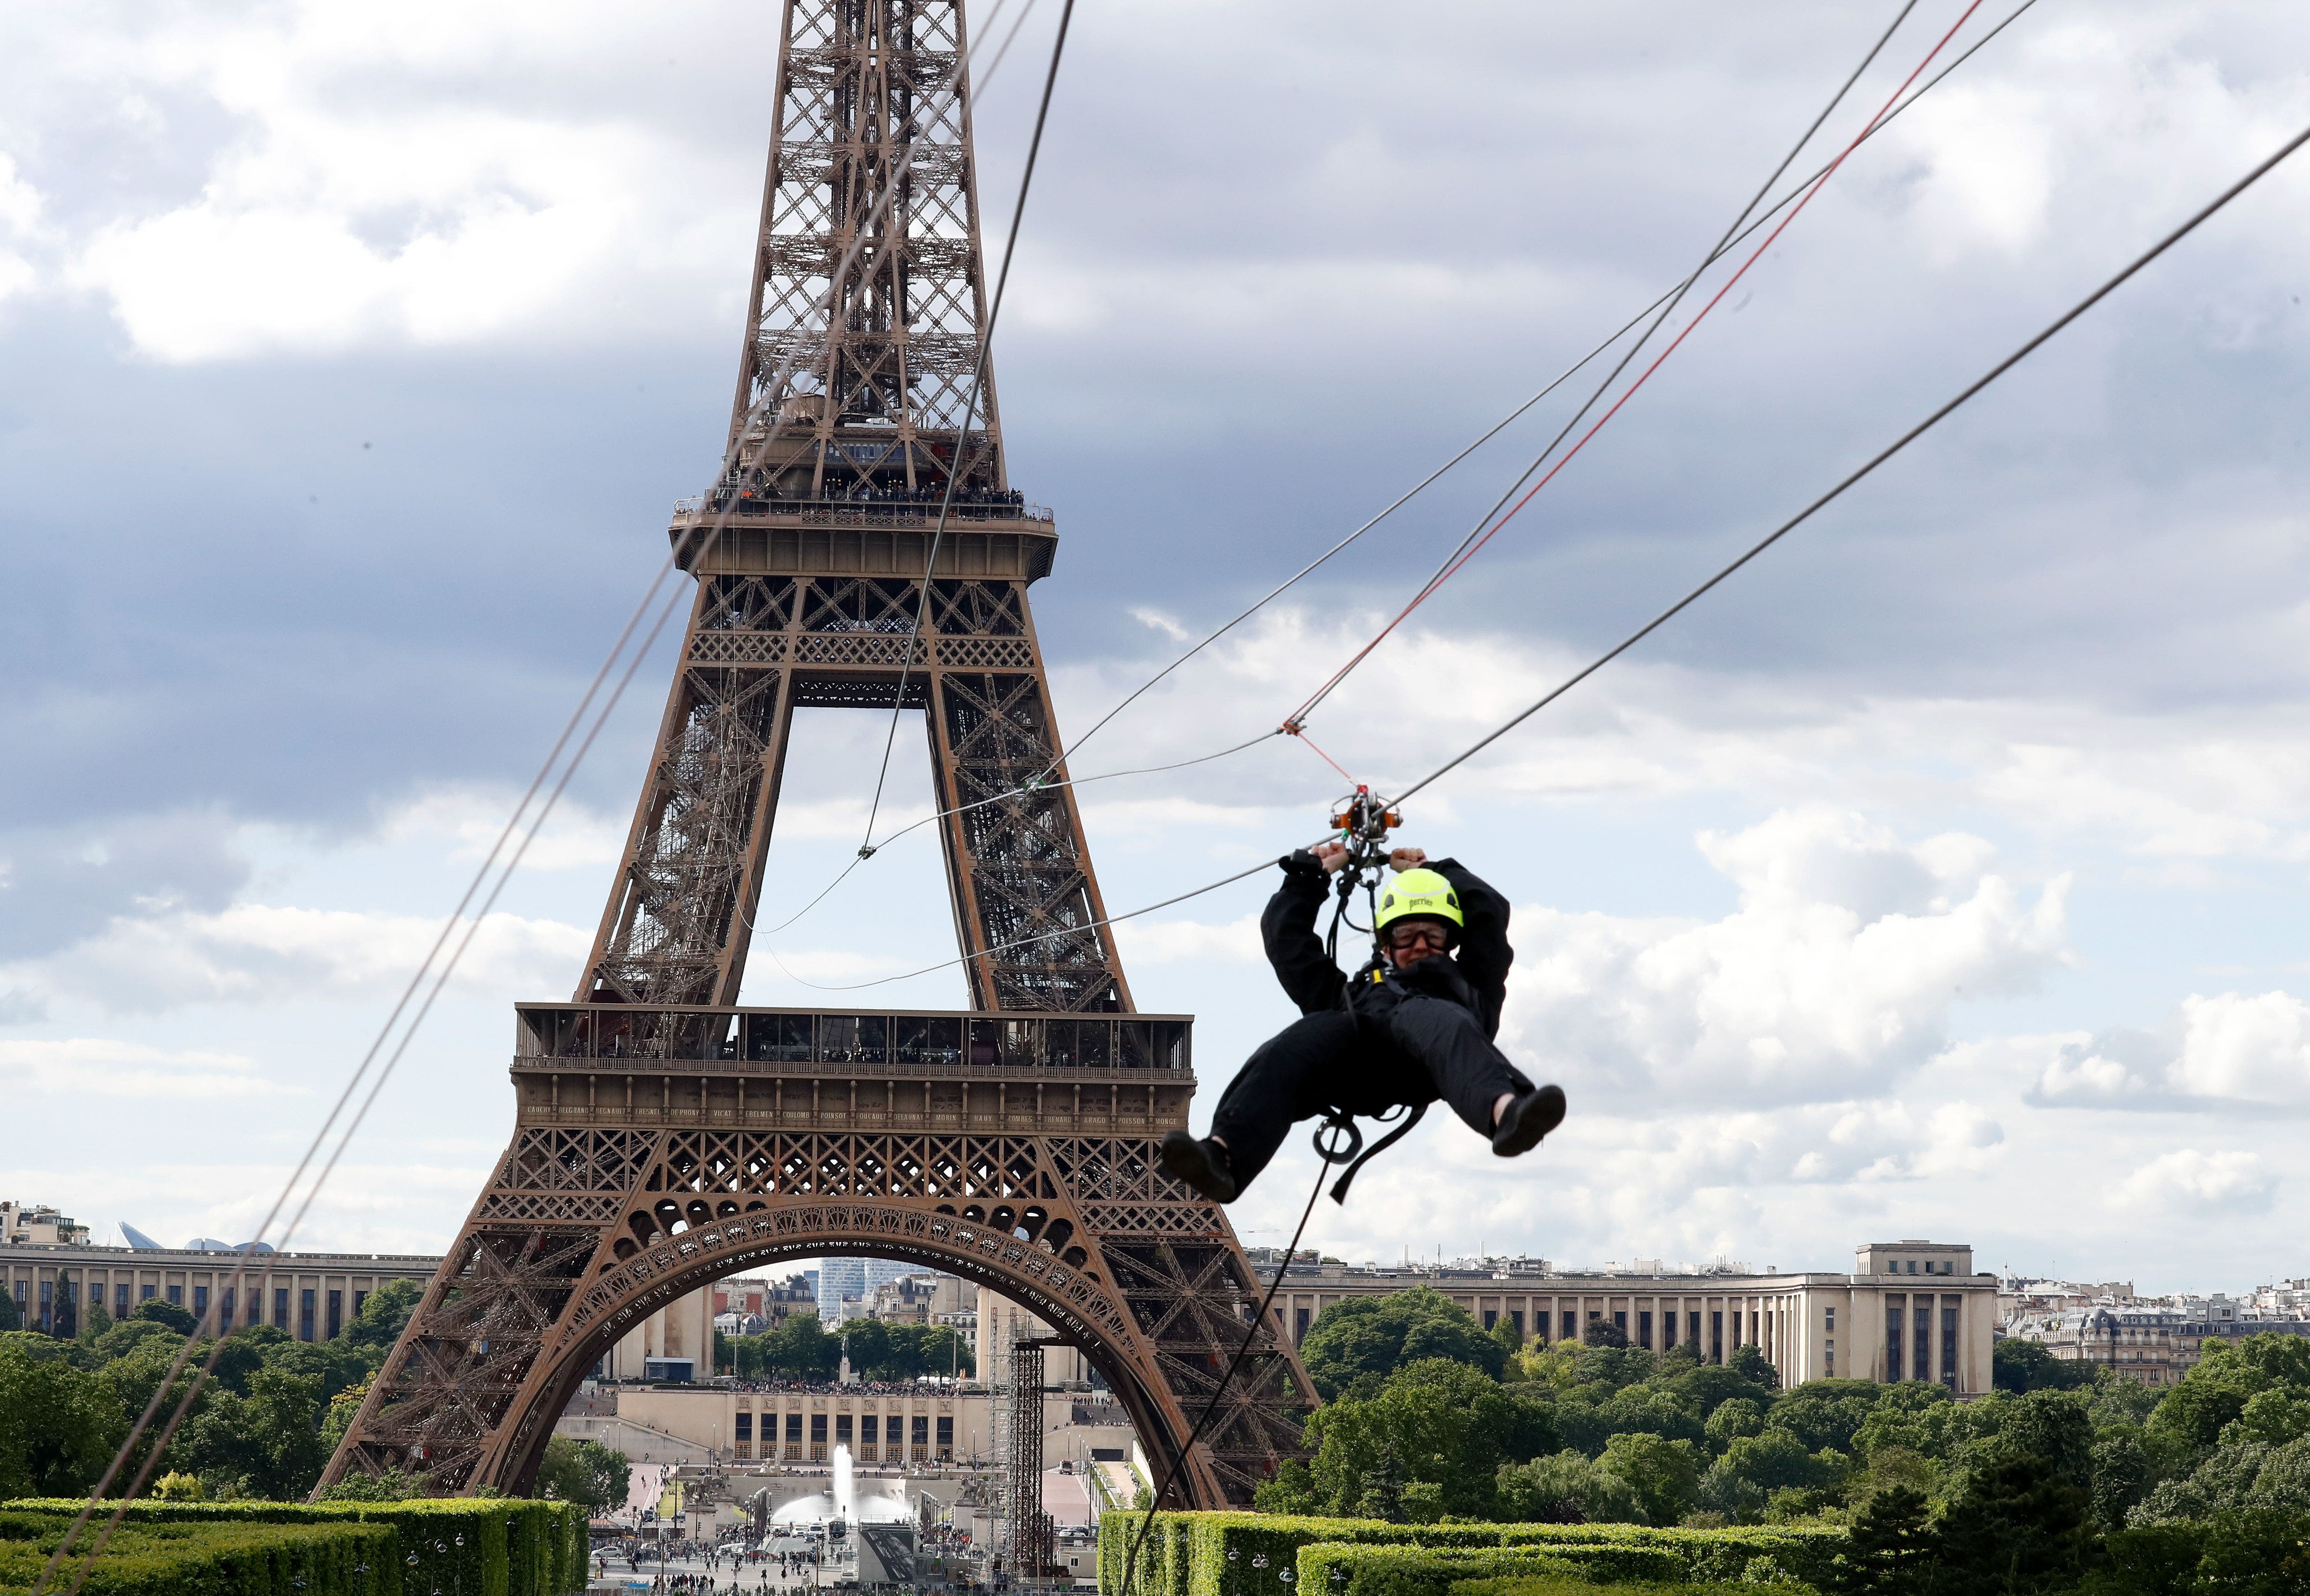 Zip line set up at Eiffel Tower for thrill-seekers